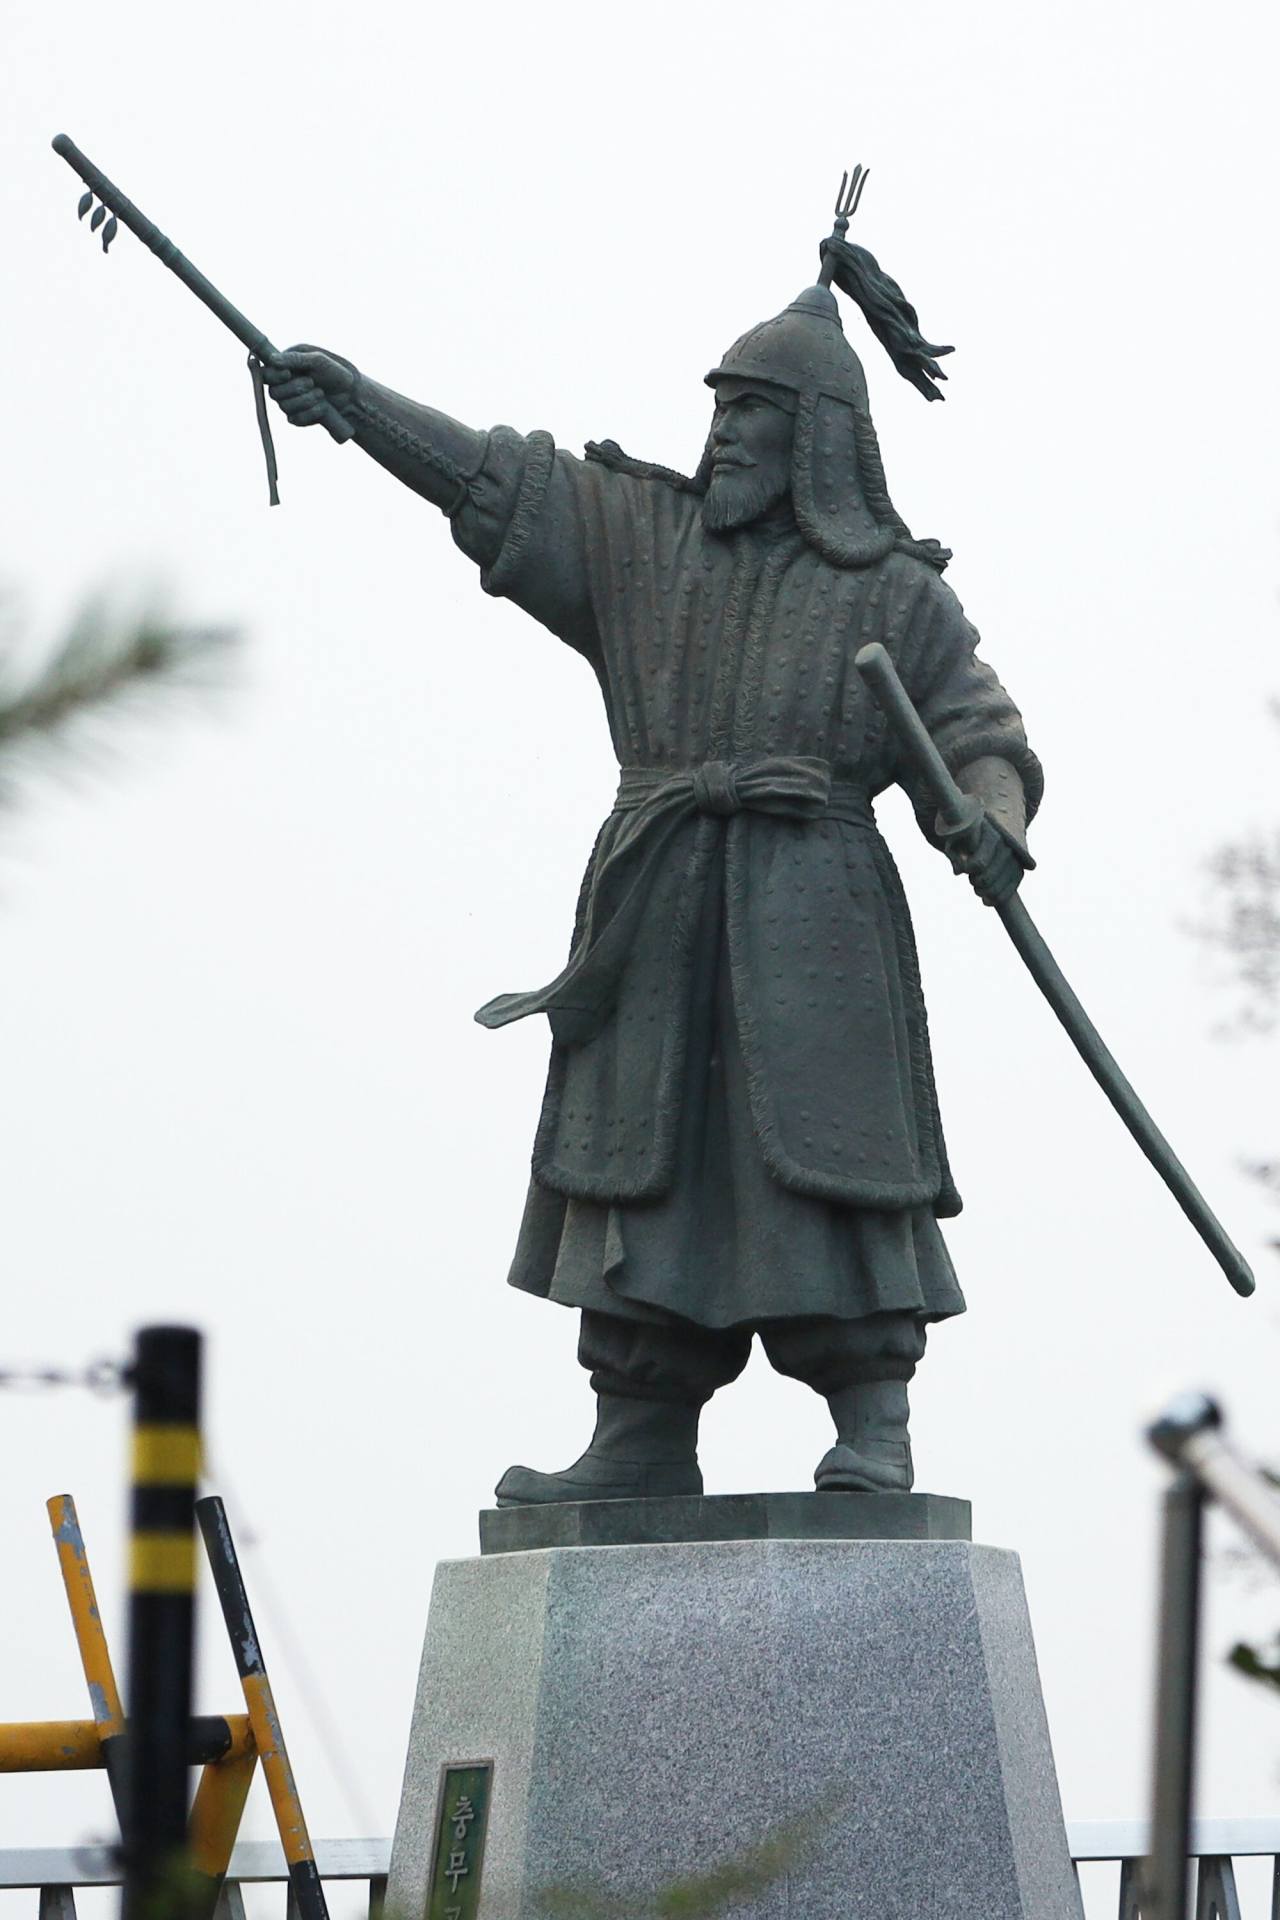 A statue of Adm. Yi Sun-sin guards over the Jindo Bridge connecting the island of Jindo to the mainland in South Jeolla Province. Photo © Hyungwon Kang